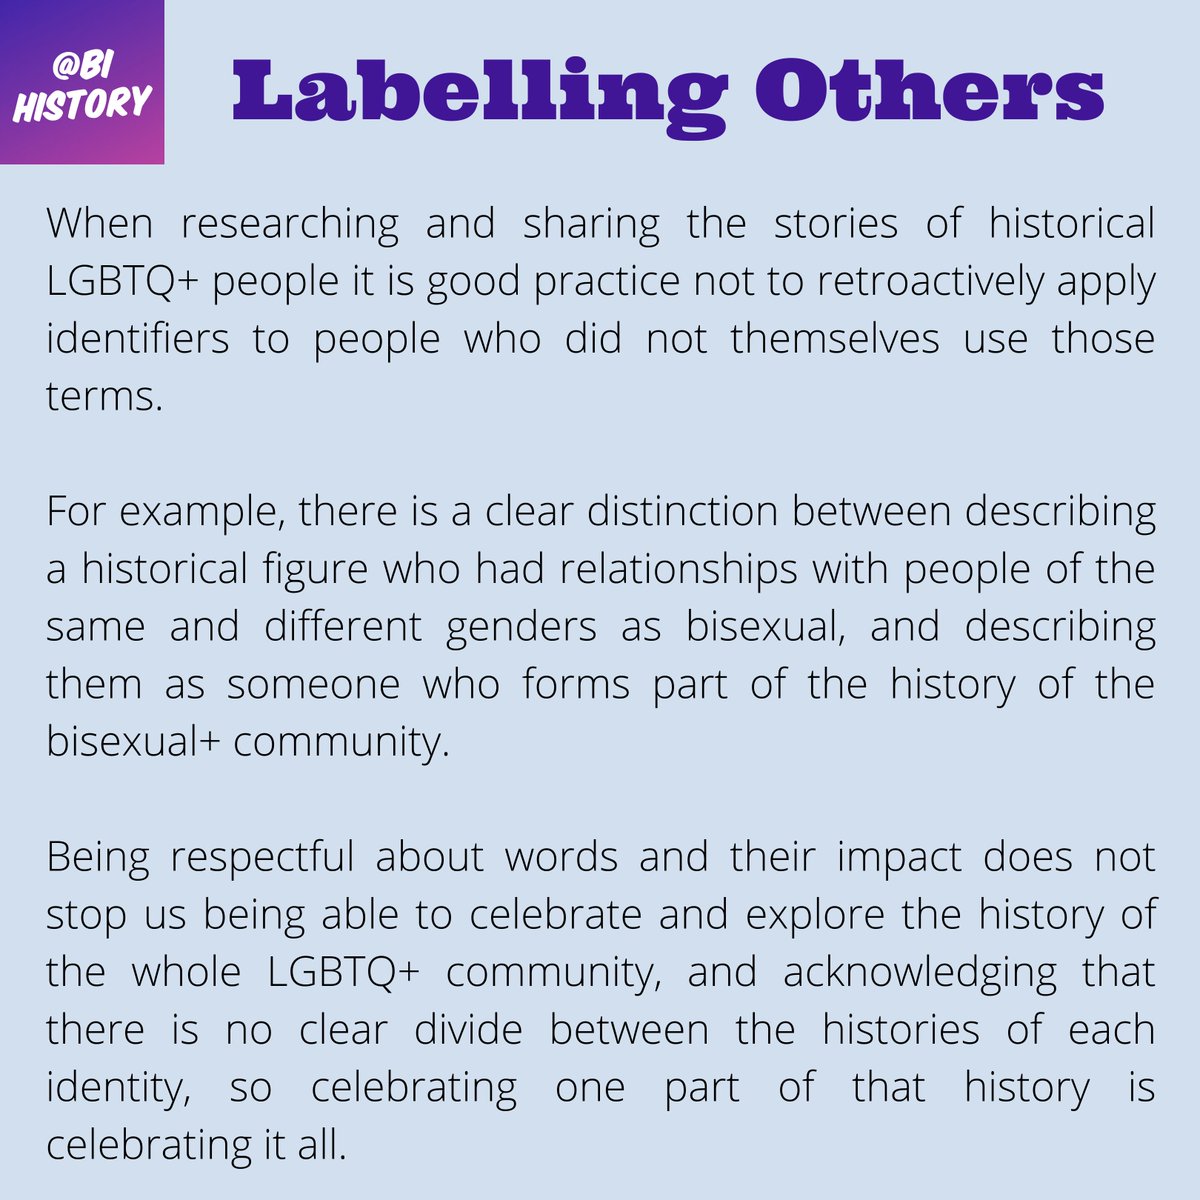 How do we look at LGBTQ+ history through the lens of our modern identifying words?